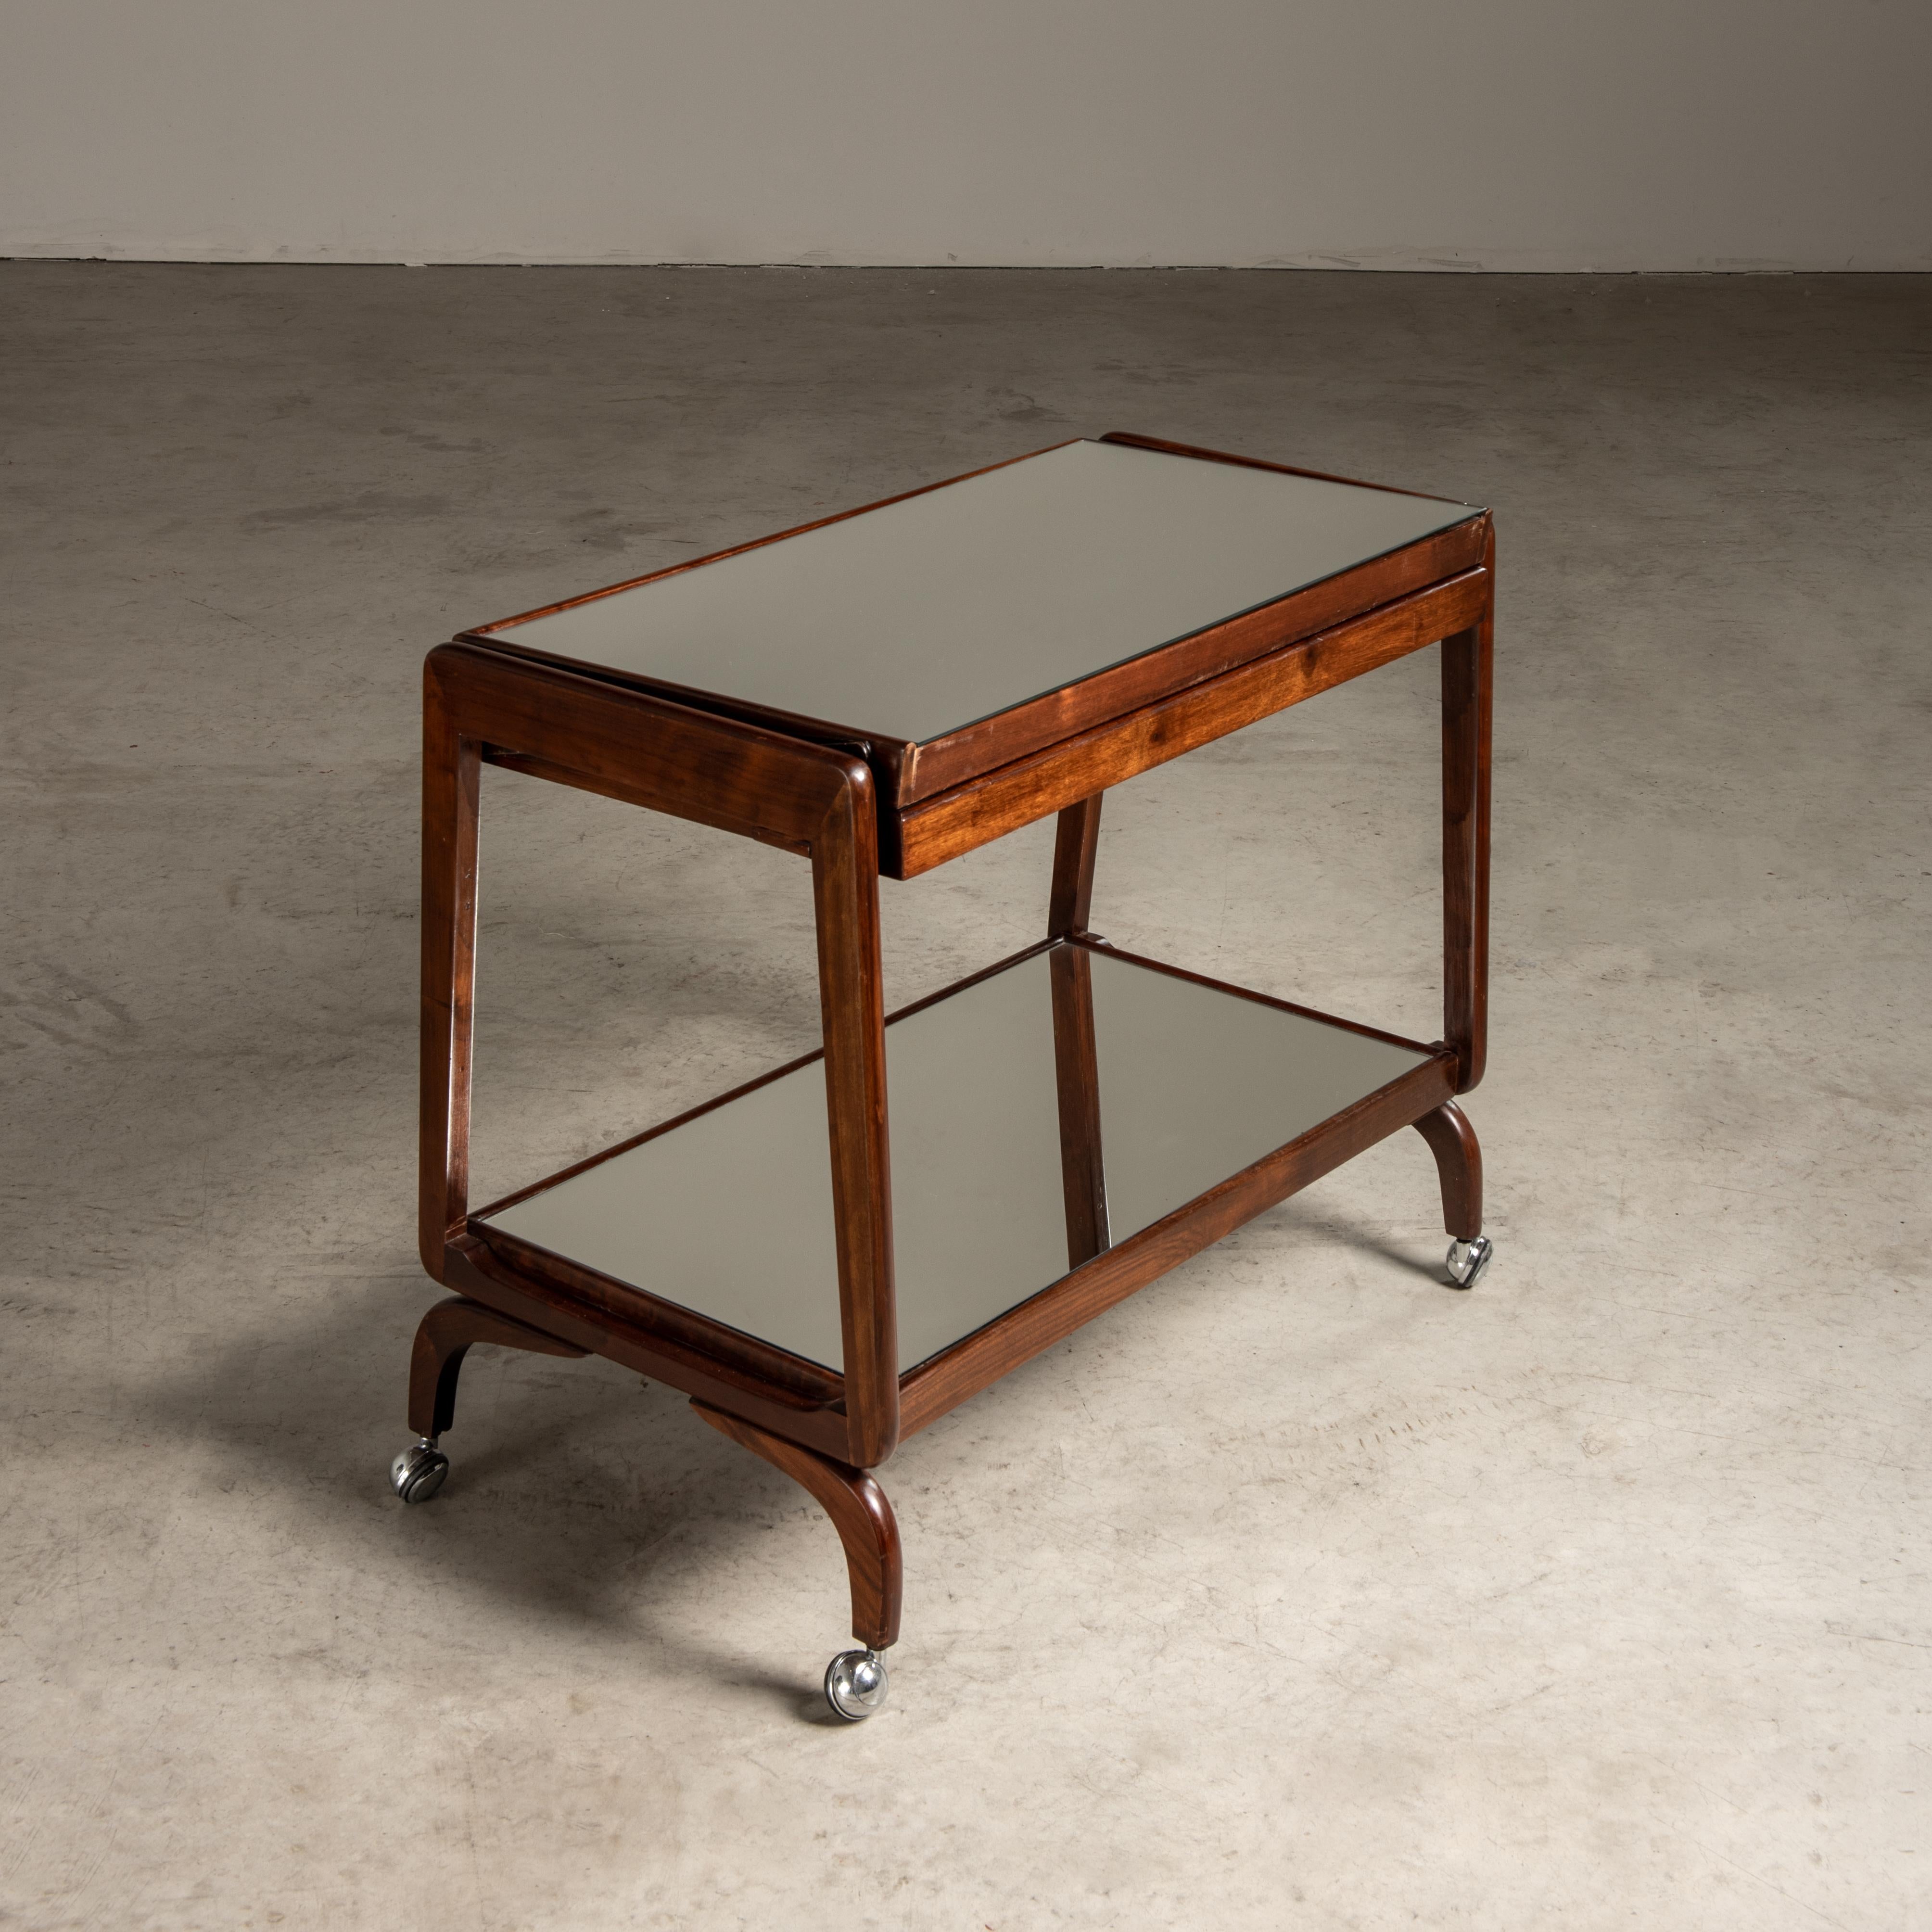 This bar cart is a charming representation of mid-20th-century design, a period that witnessed a remarkable evolution in furniture aesthetics, merging functionalism with the emerging tastes of modernism. The mid-century period, particularly the